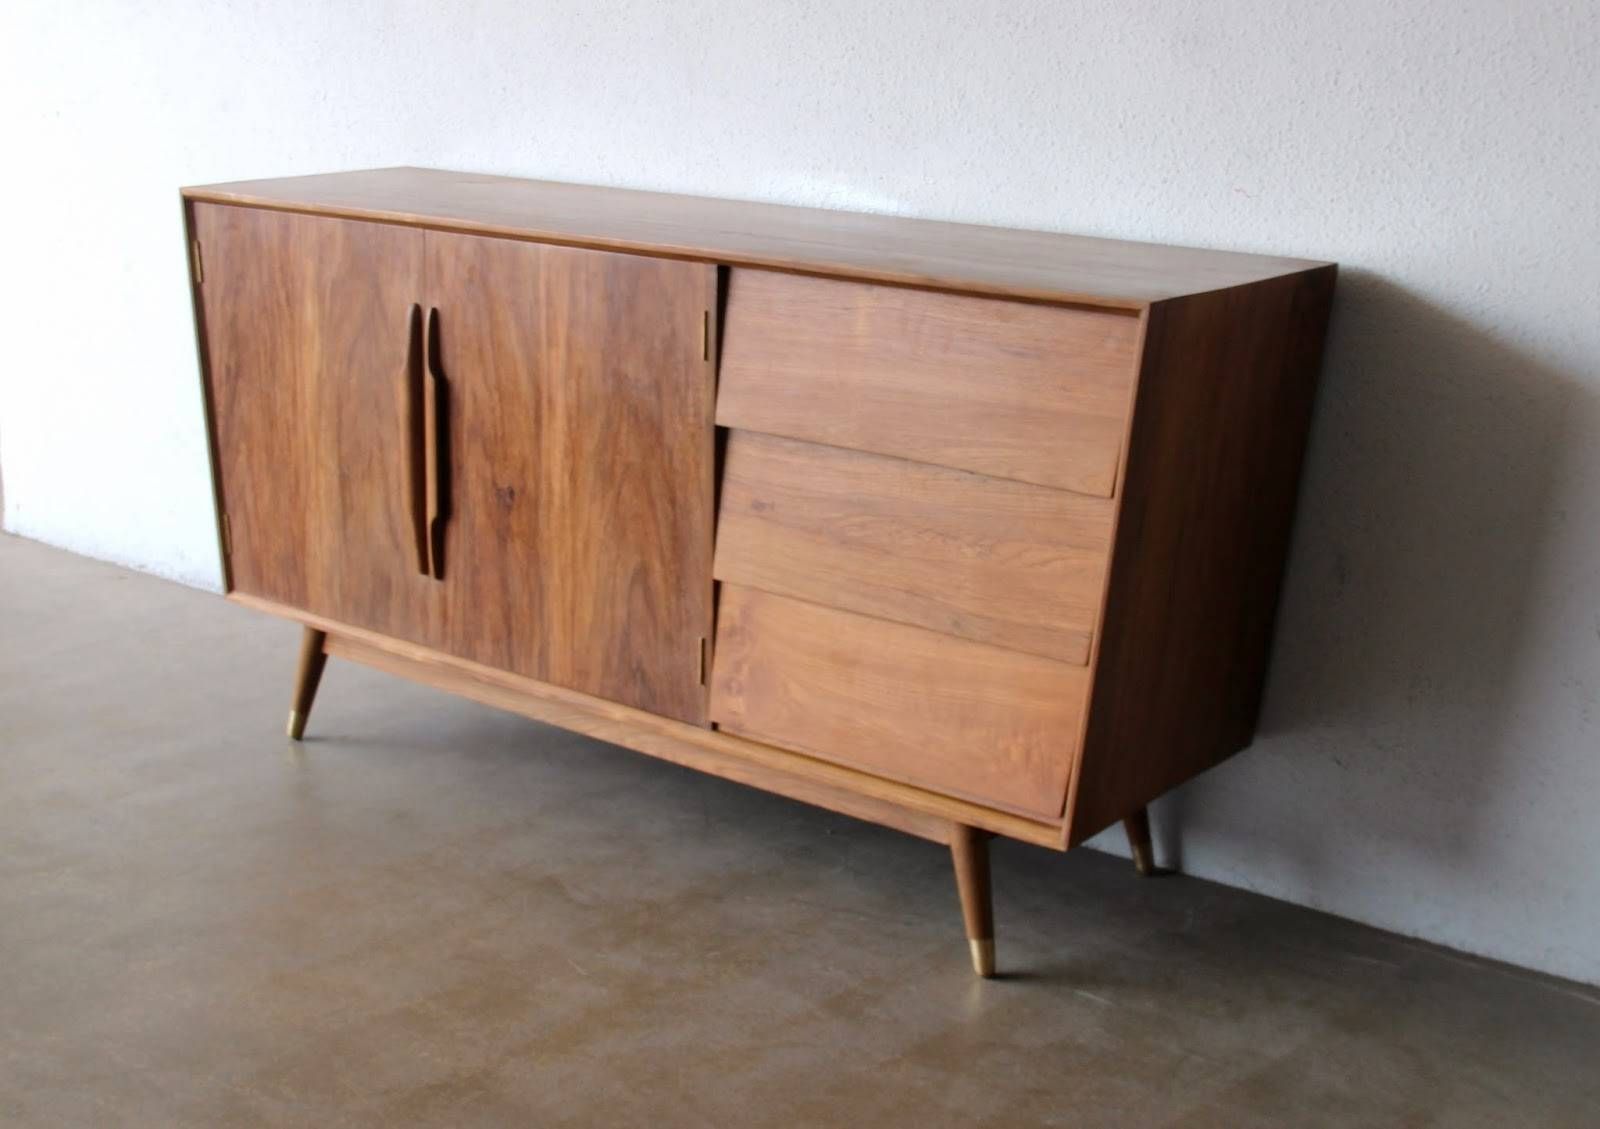 Second Charm Furniture – Mid Century Modern Influence | Bobs Furniture With Regard To 2018 Mid Century Modern Sideboards (View 11 of 15)